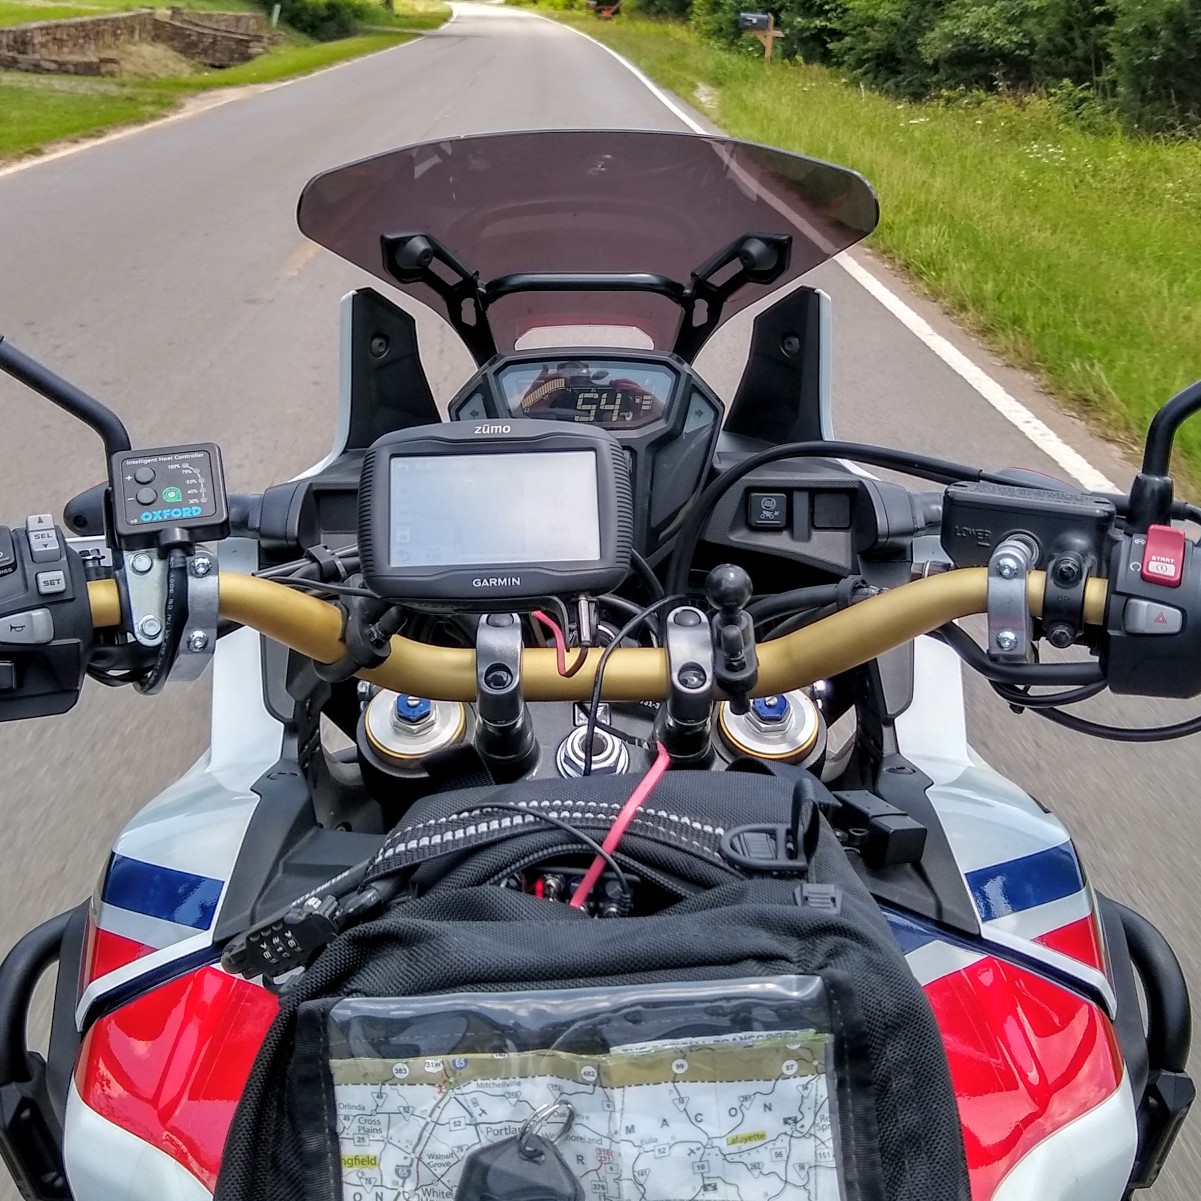 Rider Marc's Adventure on an Africa Twin 1000